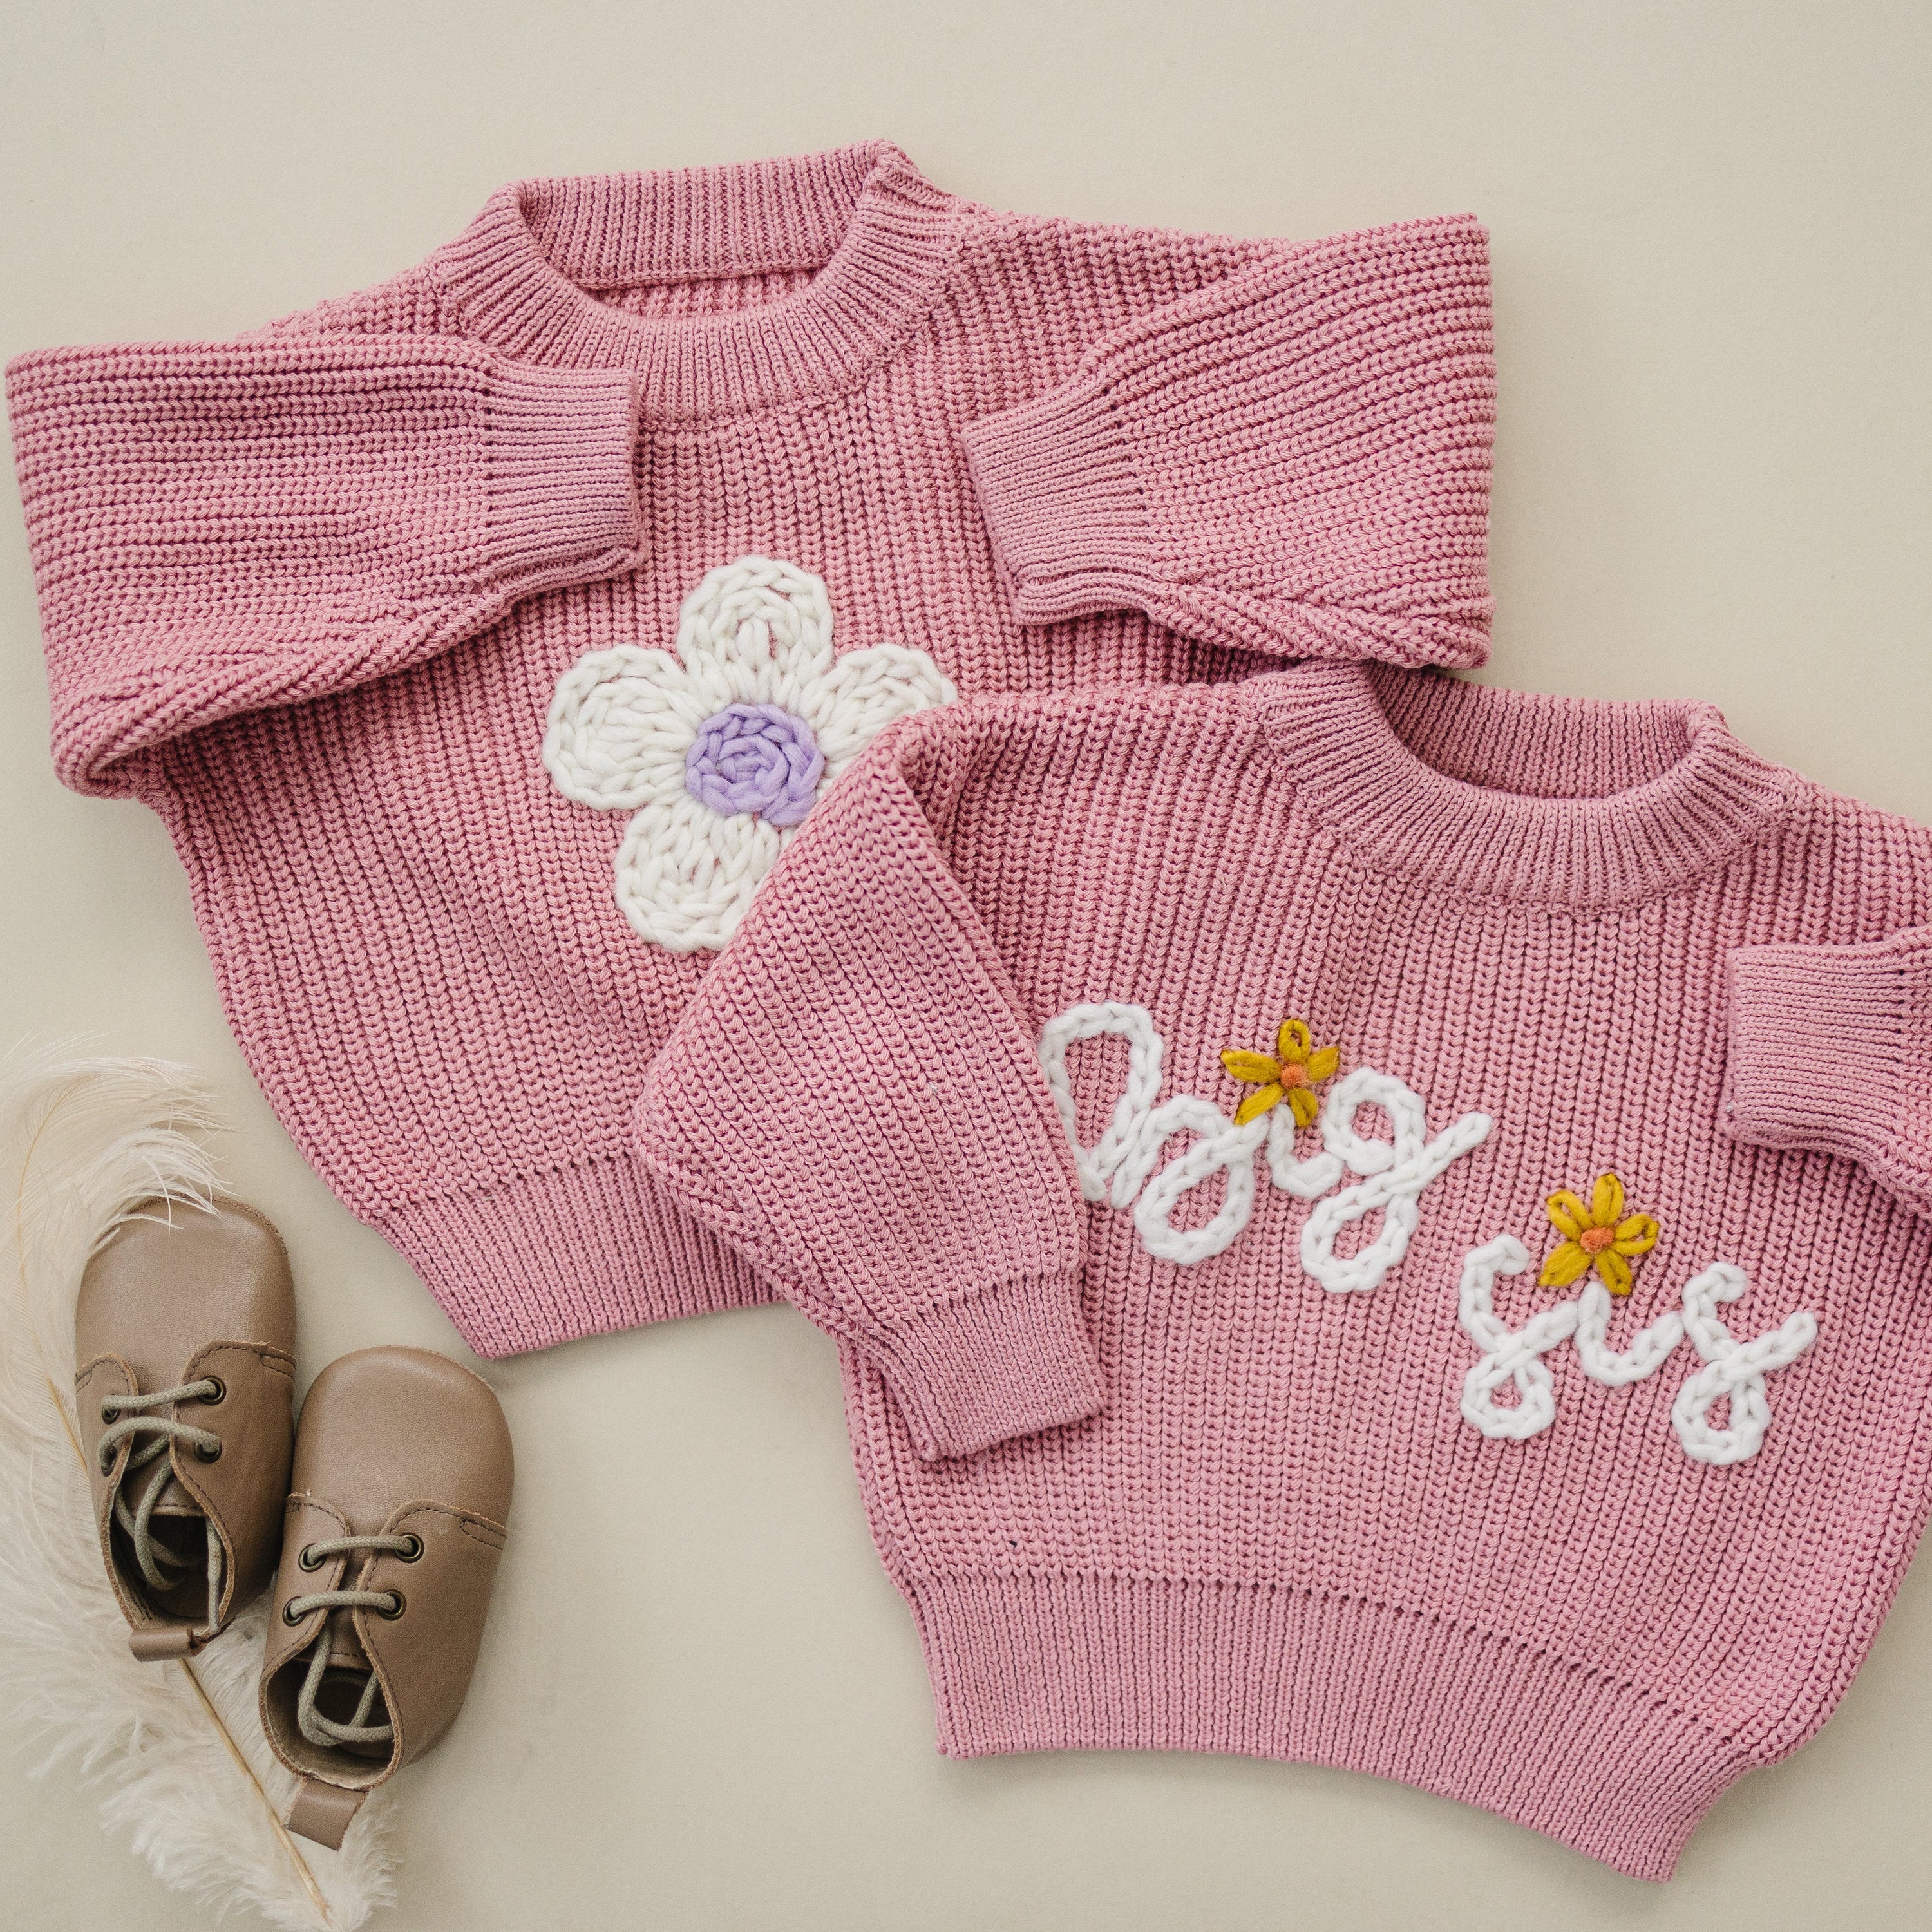 Big Sis Hand Embroidered Sweater